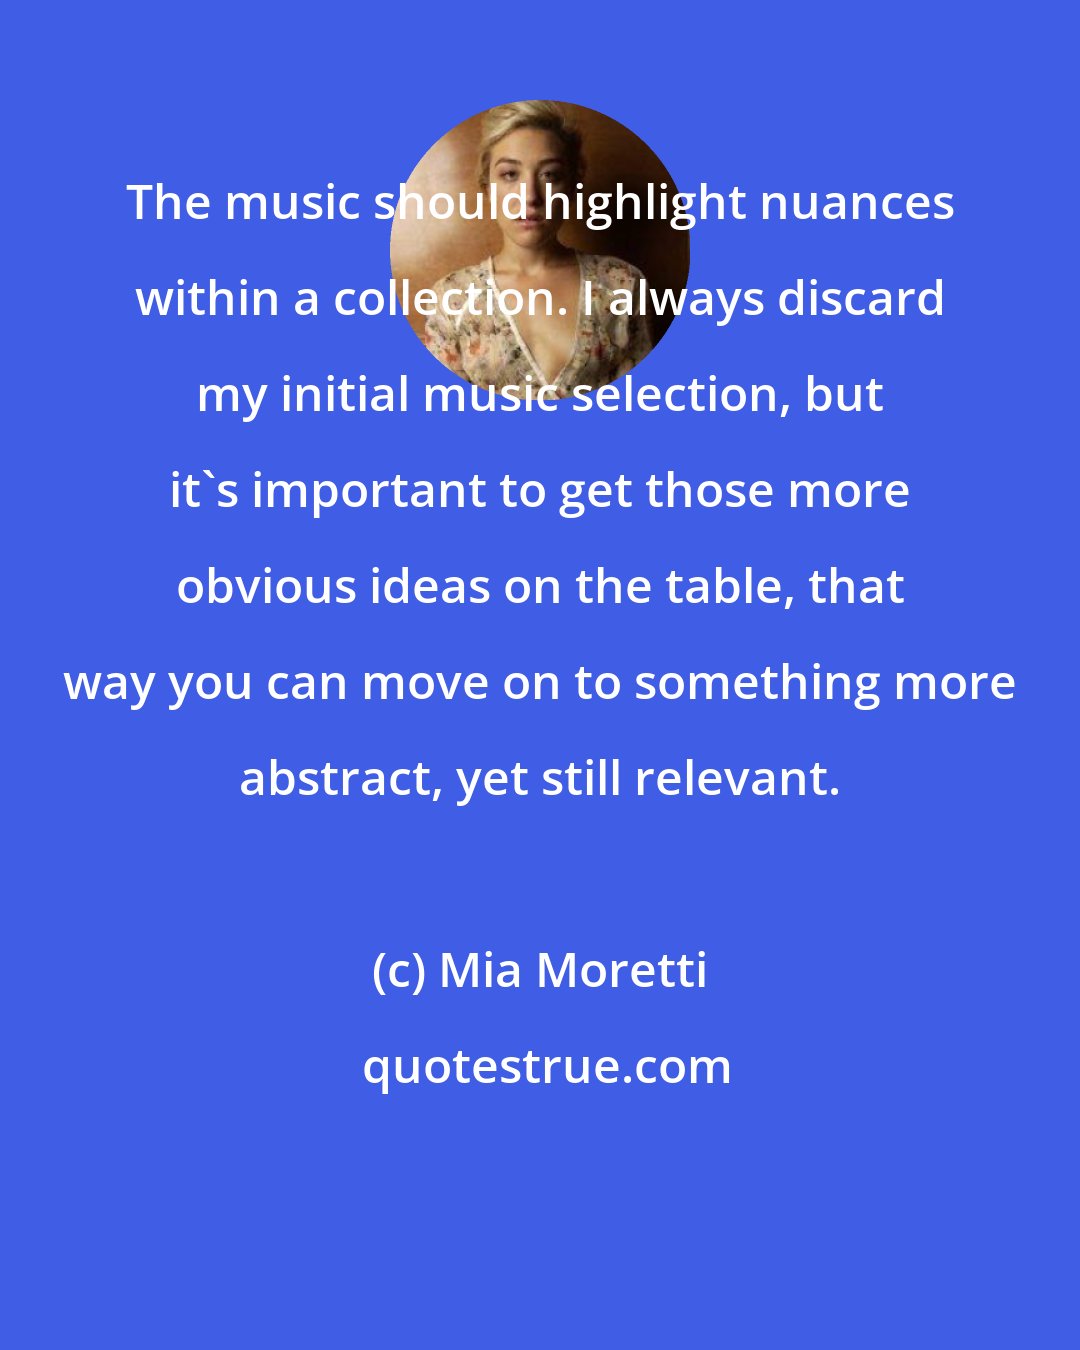 Mia Moretti: The music should highlight nuances within a collection. I always discard my initial music selection, but it's important to get those more obvious ideas on the table, that way you can move on to something more abstract, yet still relevant.